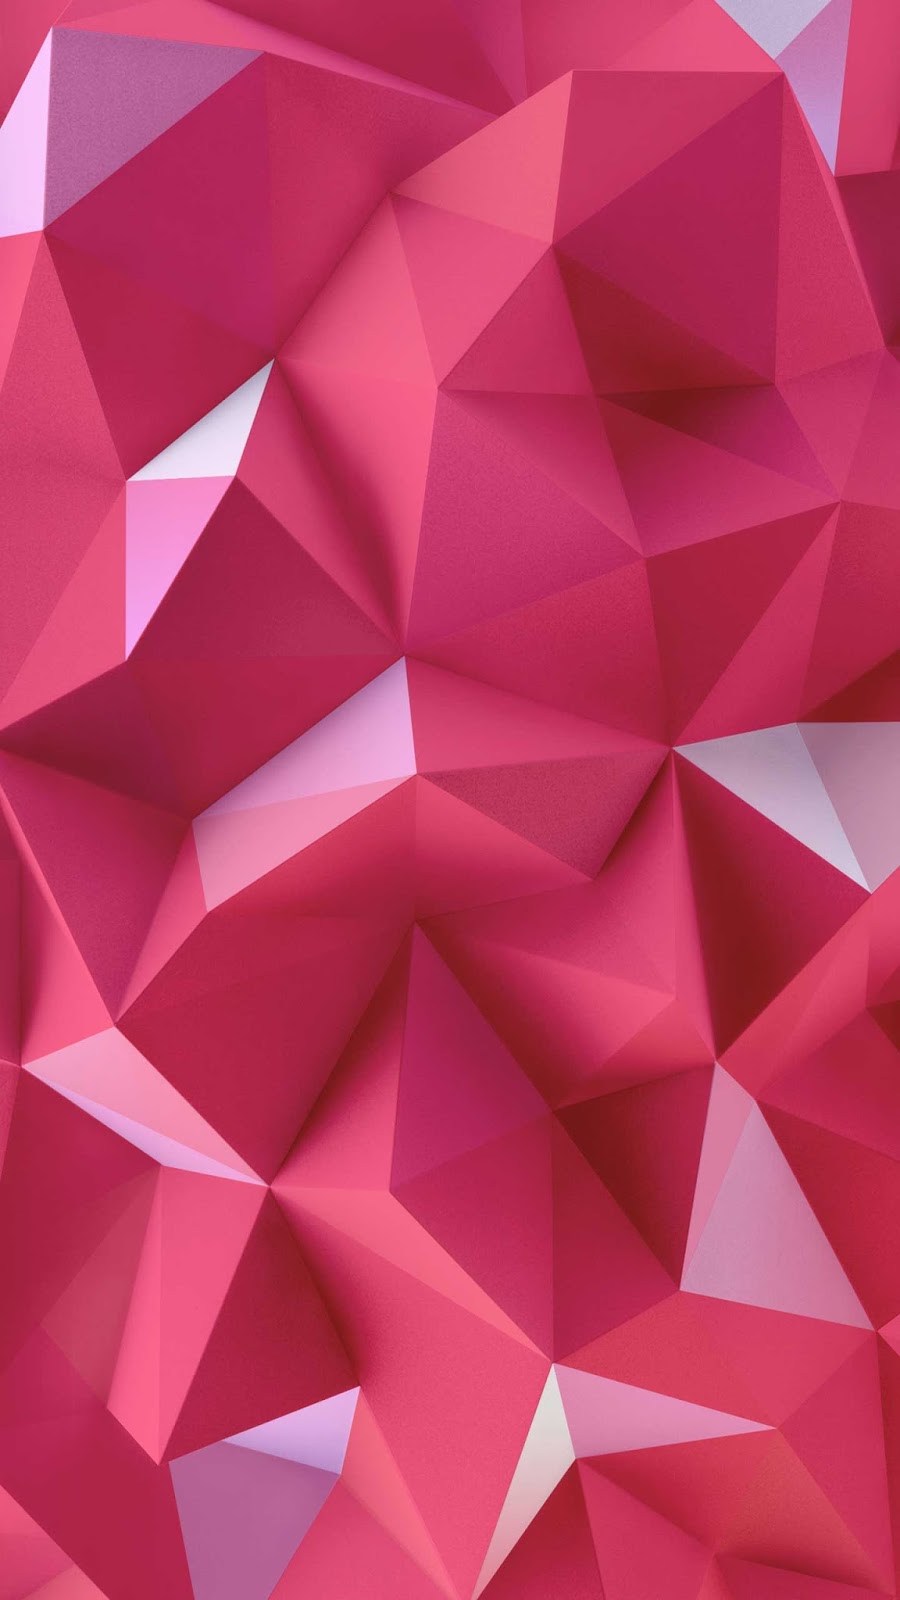 wallpapers lg g4,pink,red,magenta,pattern,triangle